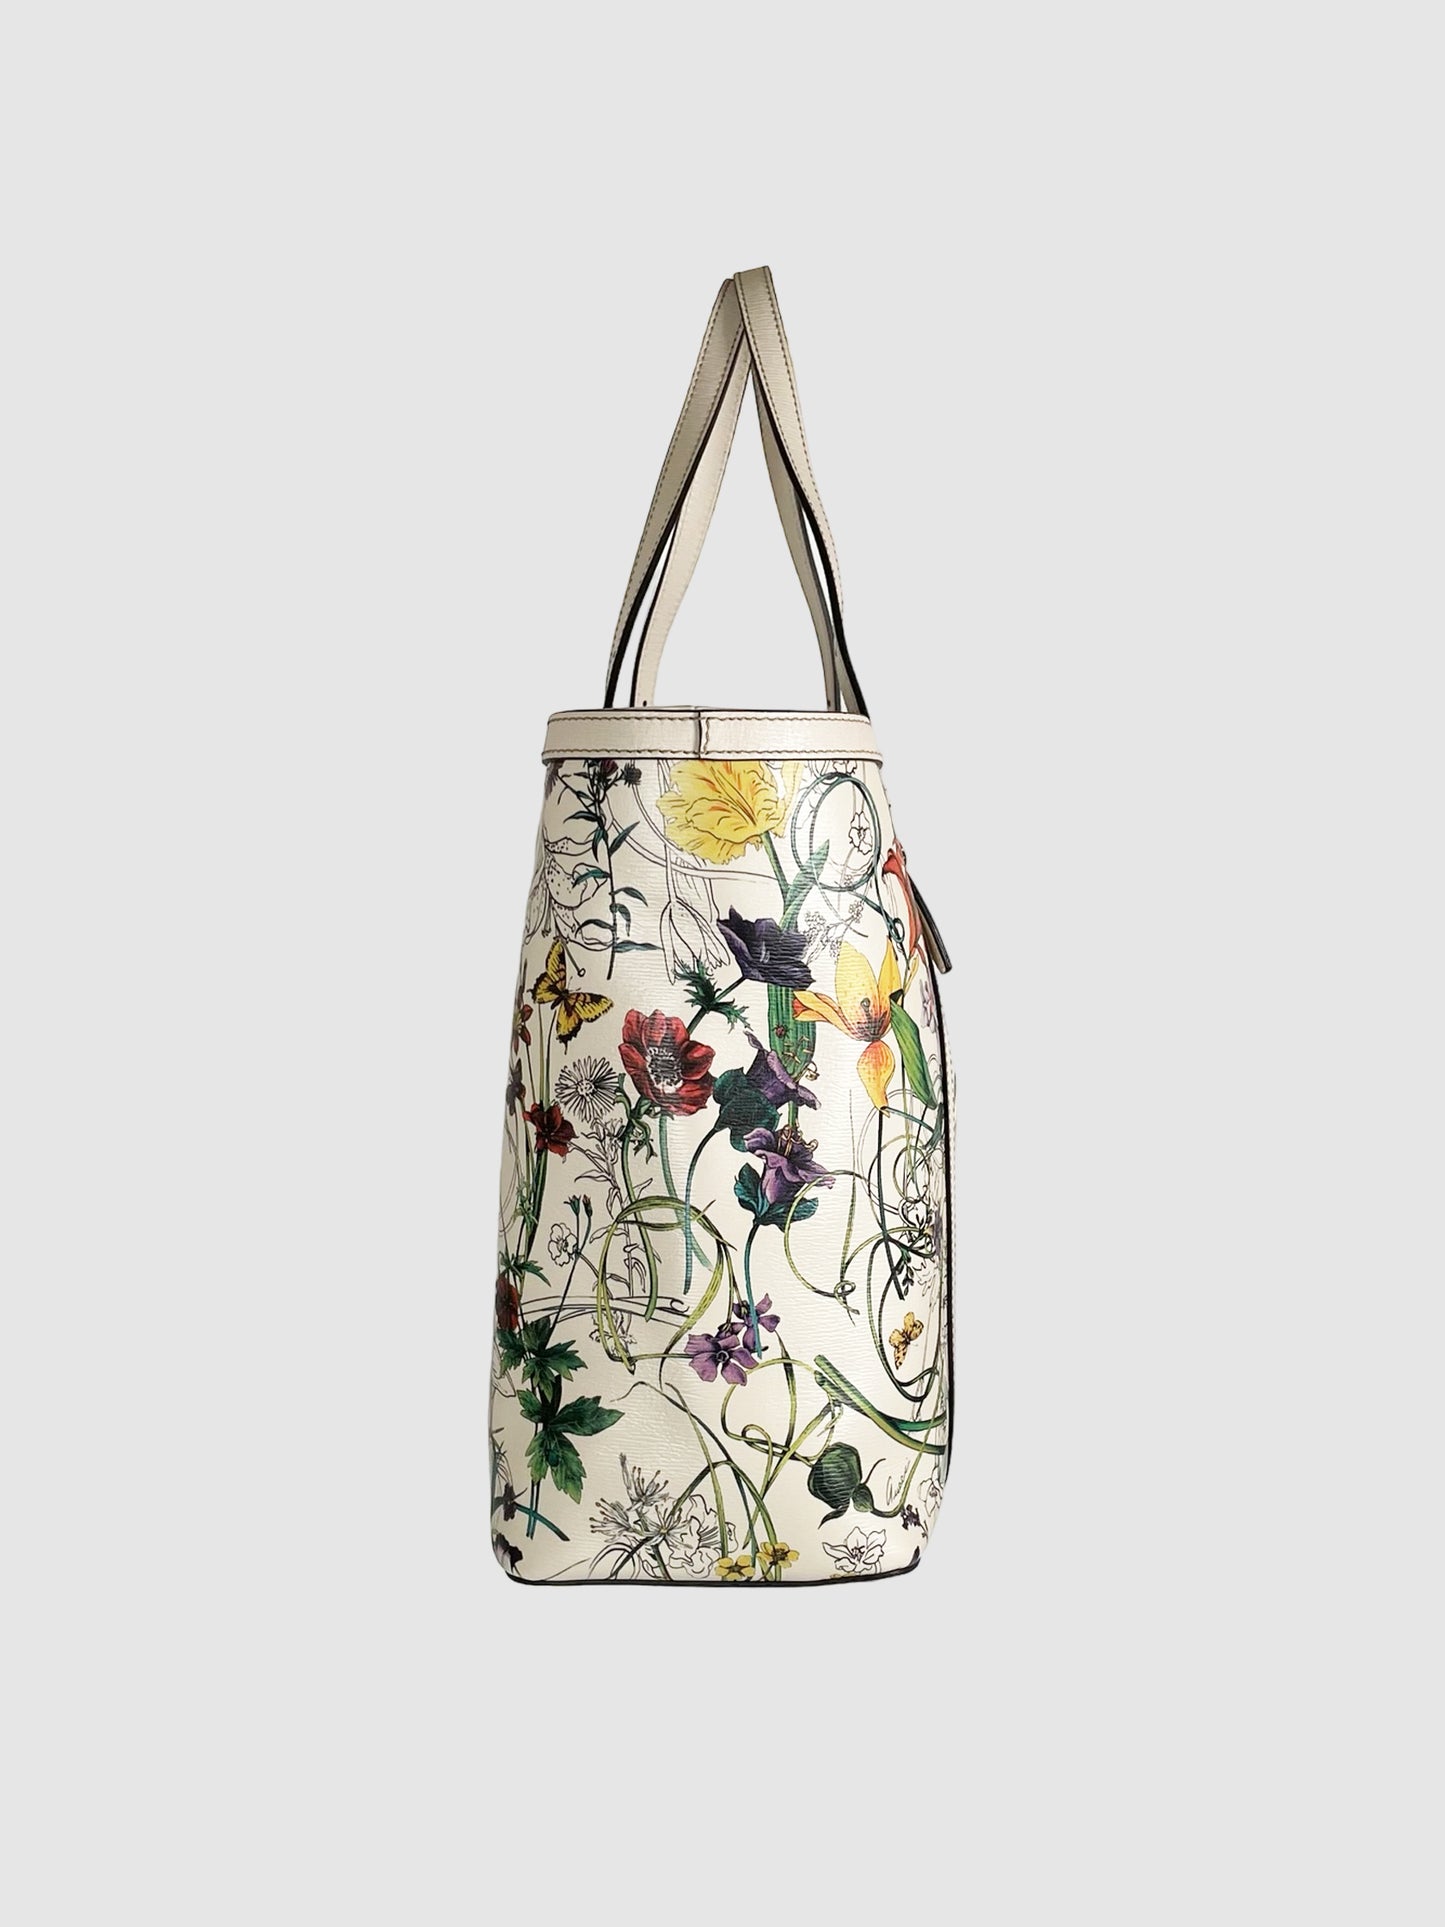 Gucci White with Multi Coloured Floral Printed Canvas Tote Bag